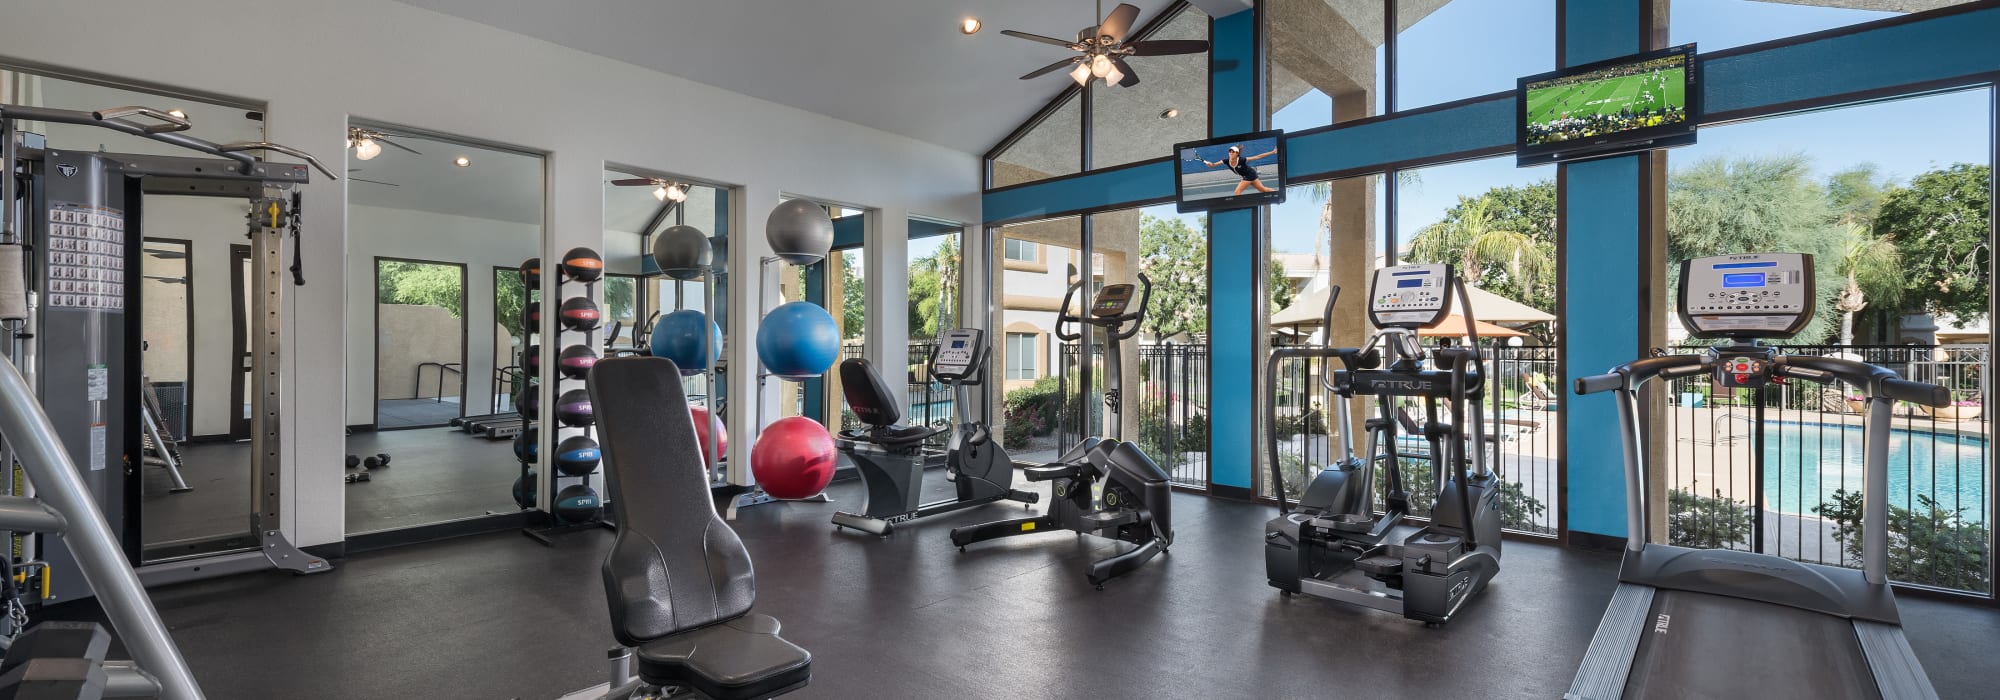 Resident fitness center at Club Cancun in Chandler, Arizona